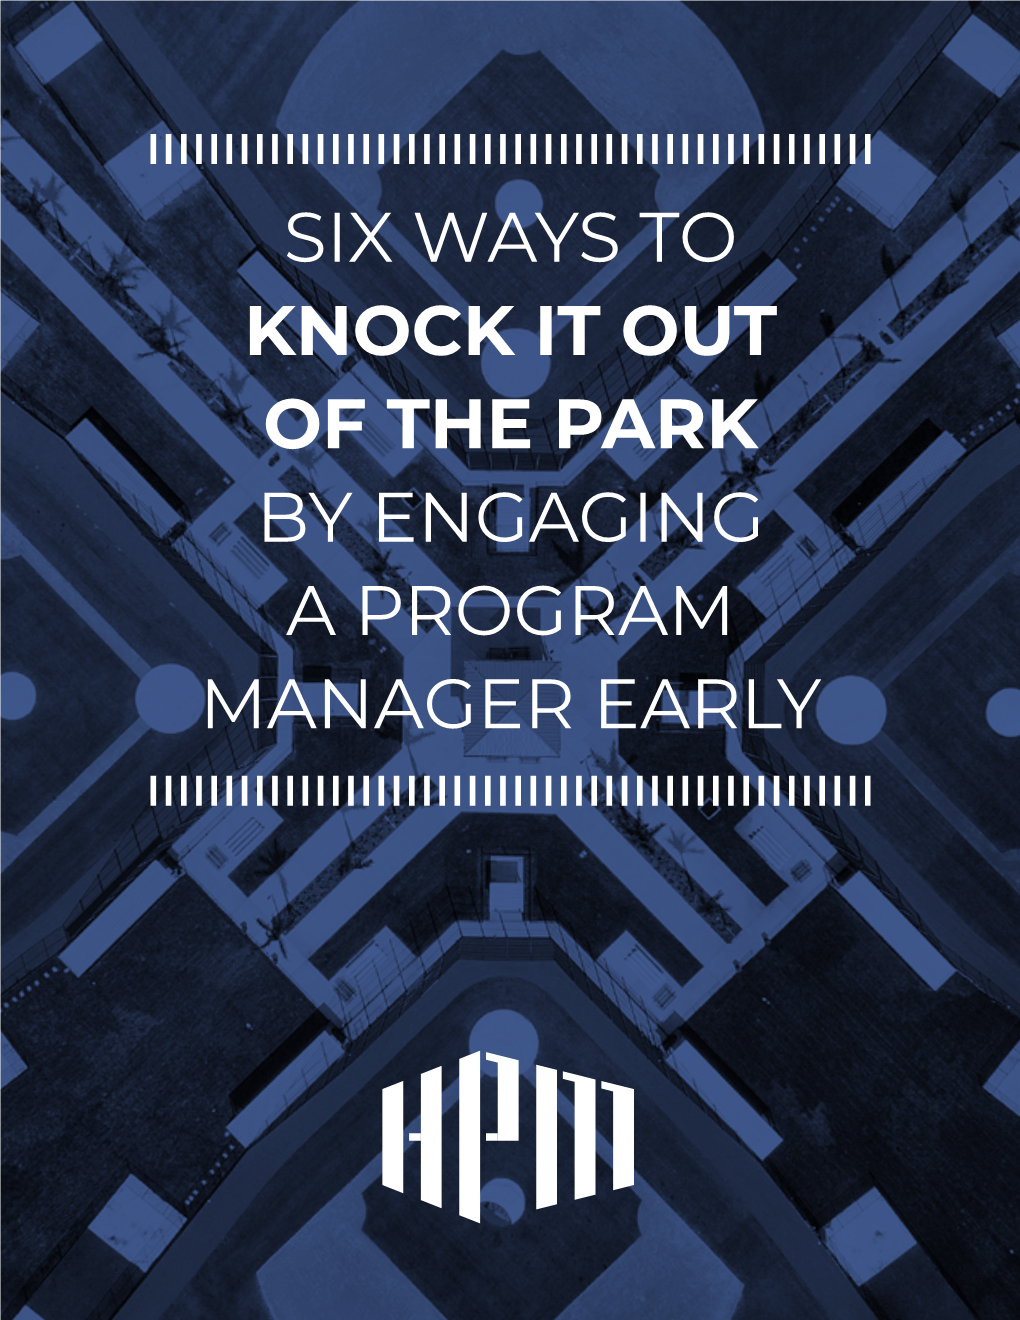 Six Ways to Knock It out of the Park by Engaging a Program Manager Early Six Ways to Knock It out of the Park by Engaging a Program Manager Early